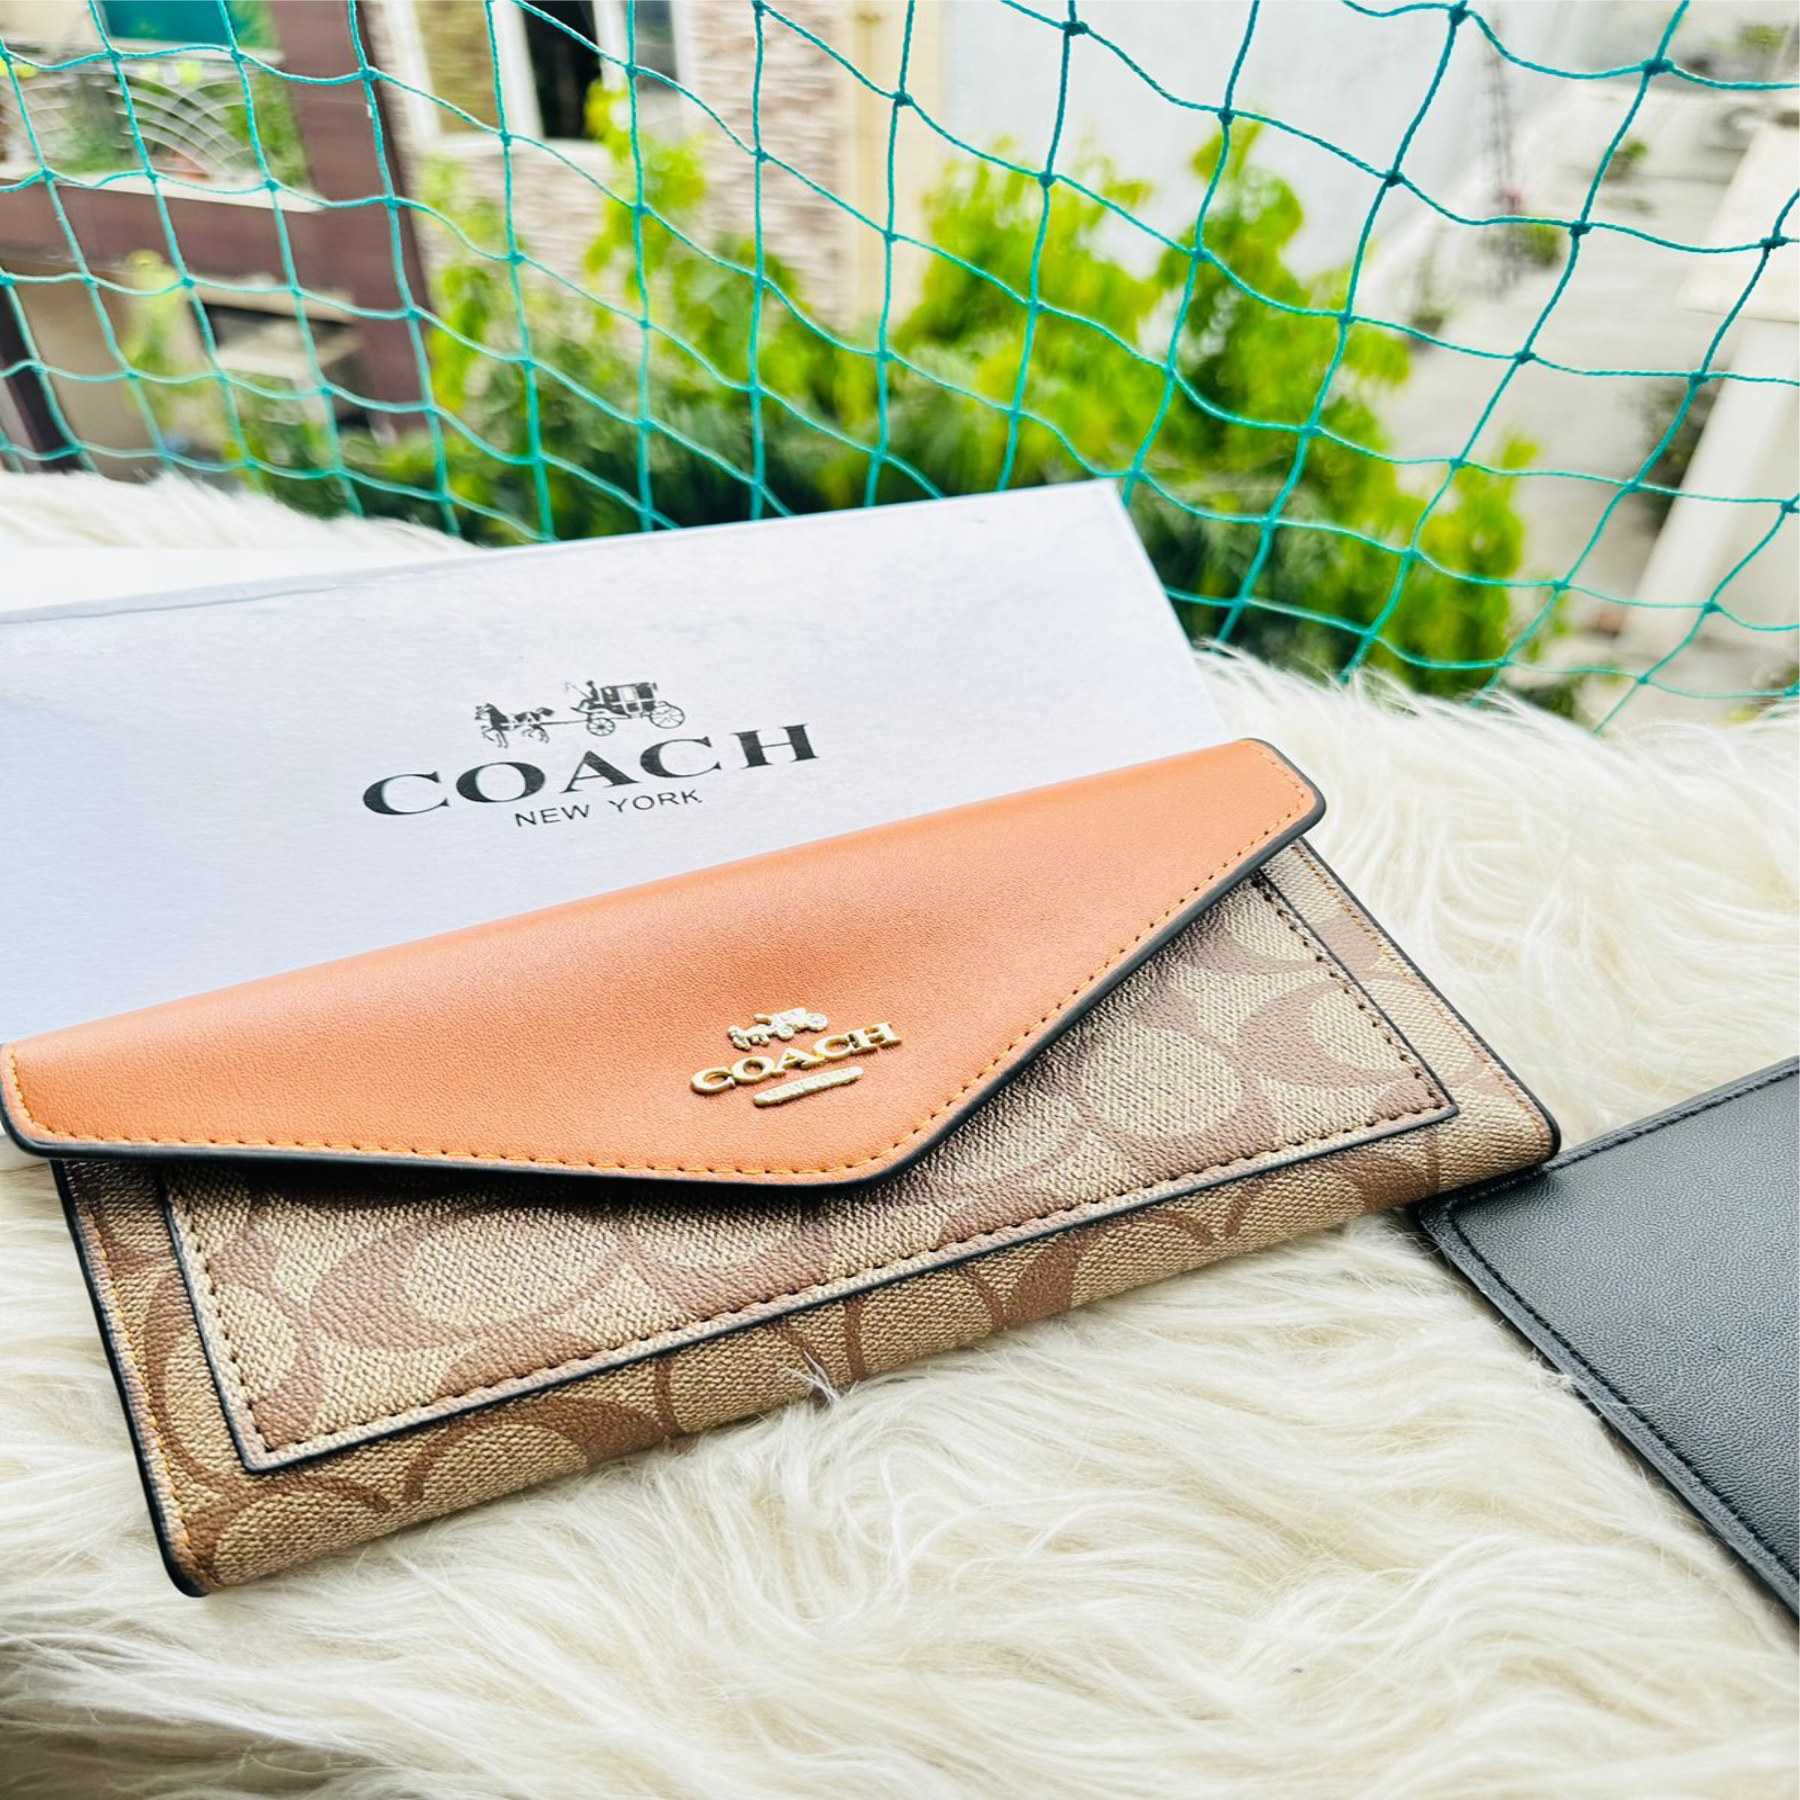 COACH by Jessica's Bags & More